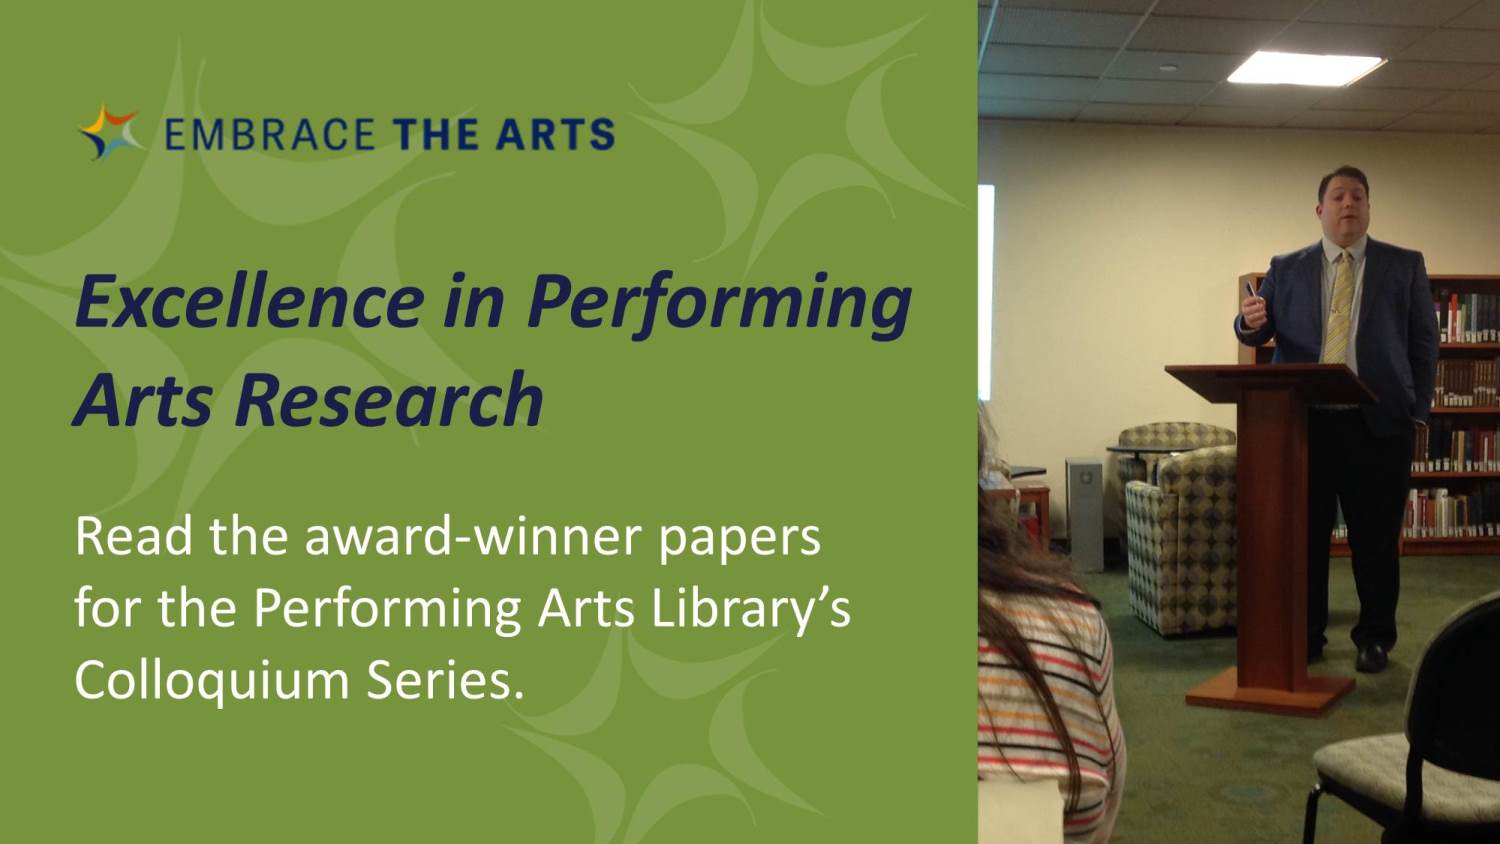 Excellence in Performing Arts Research